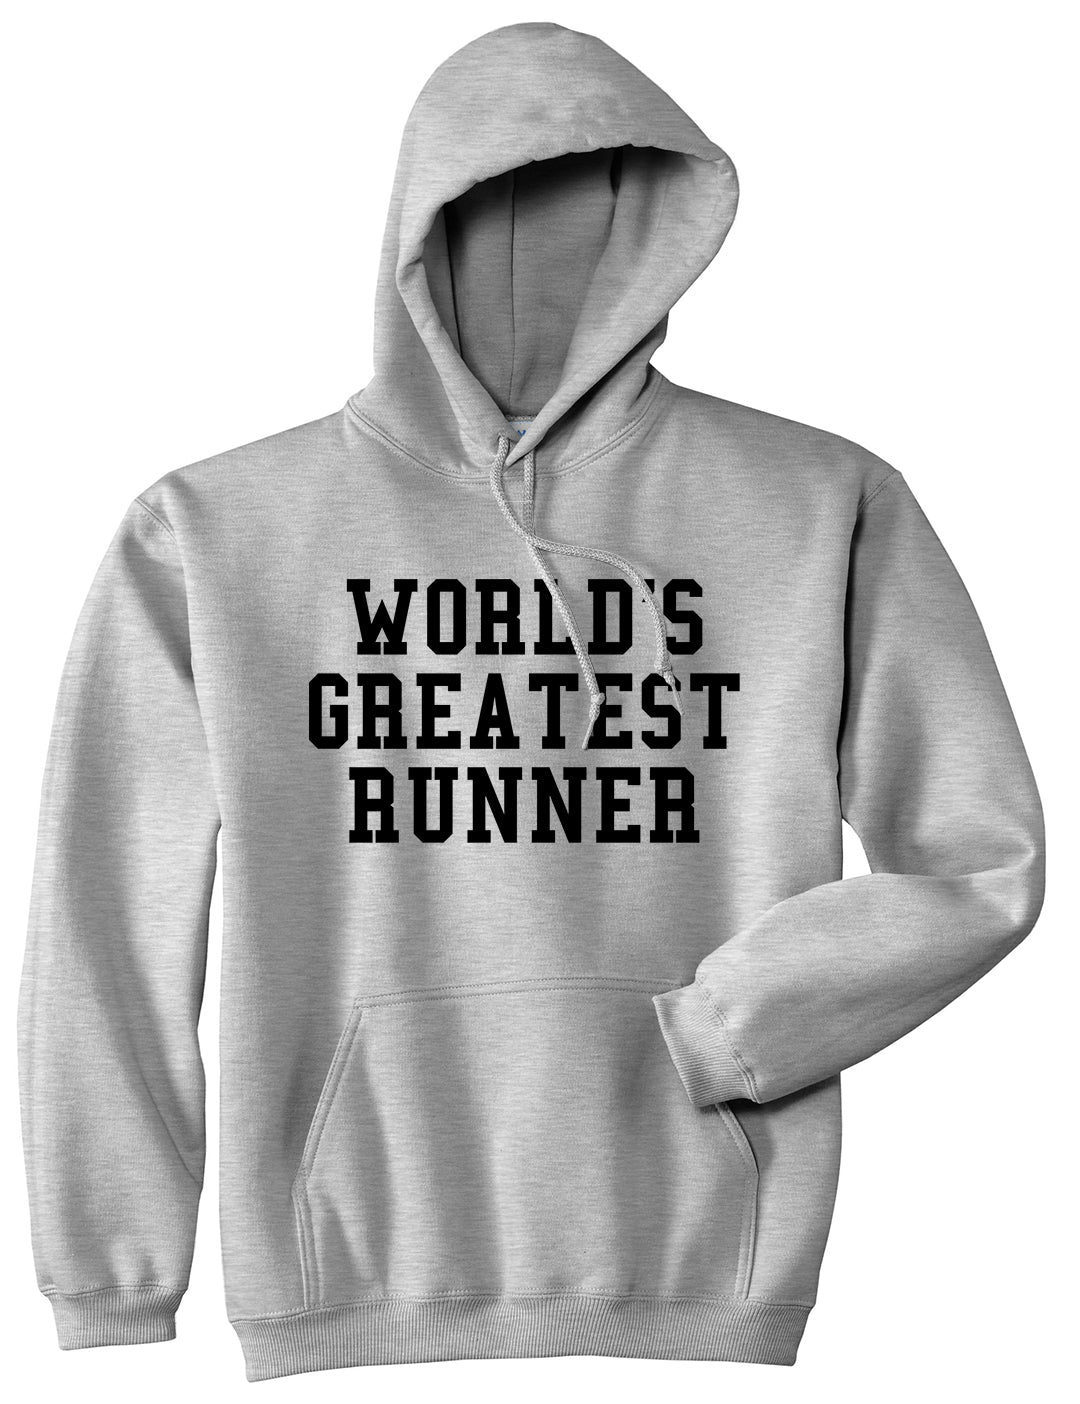 Worlds Greatest Runner Funny Fitness Mens Pullover Hoodie Grey